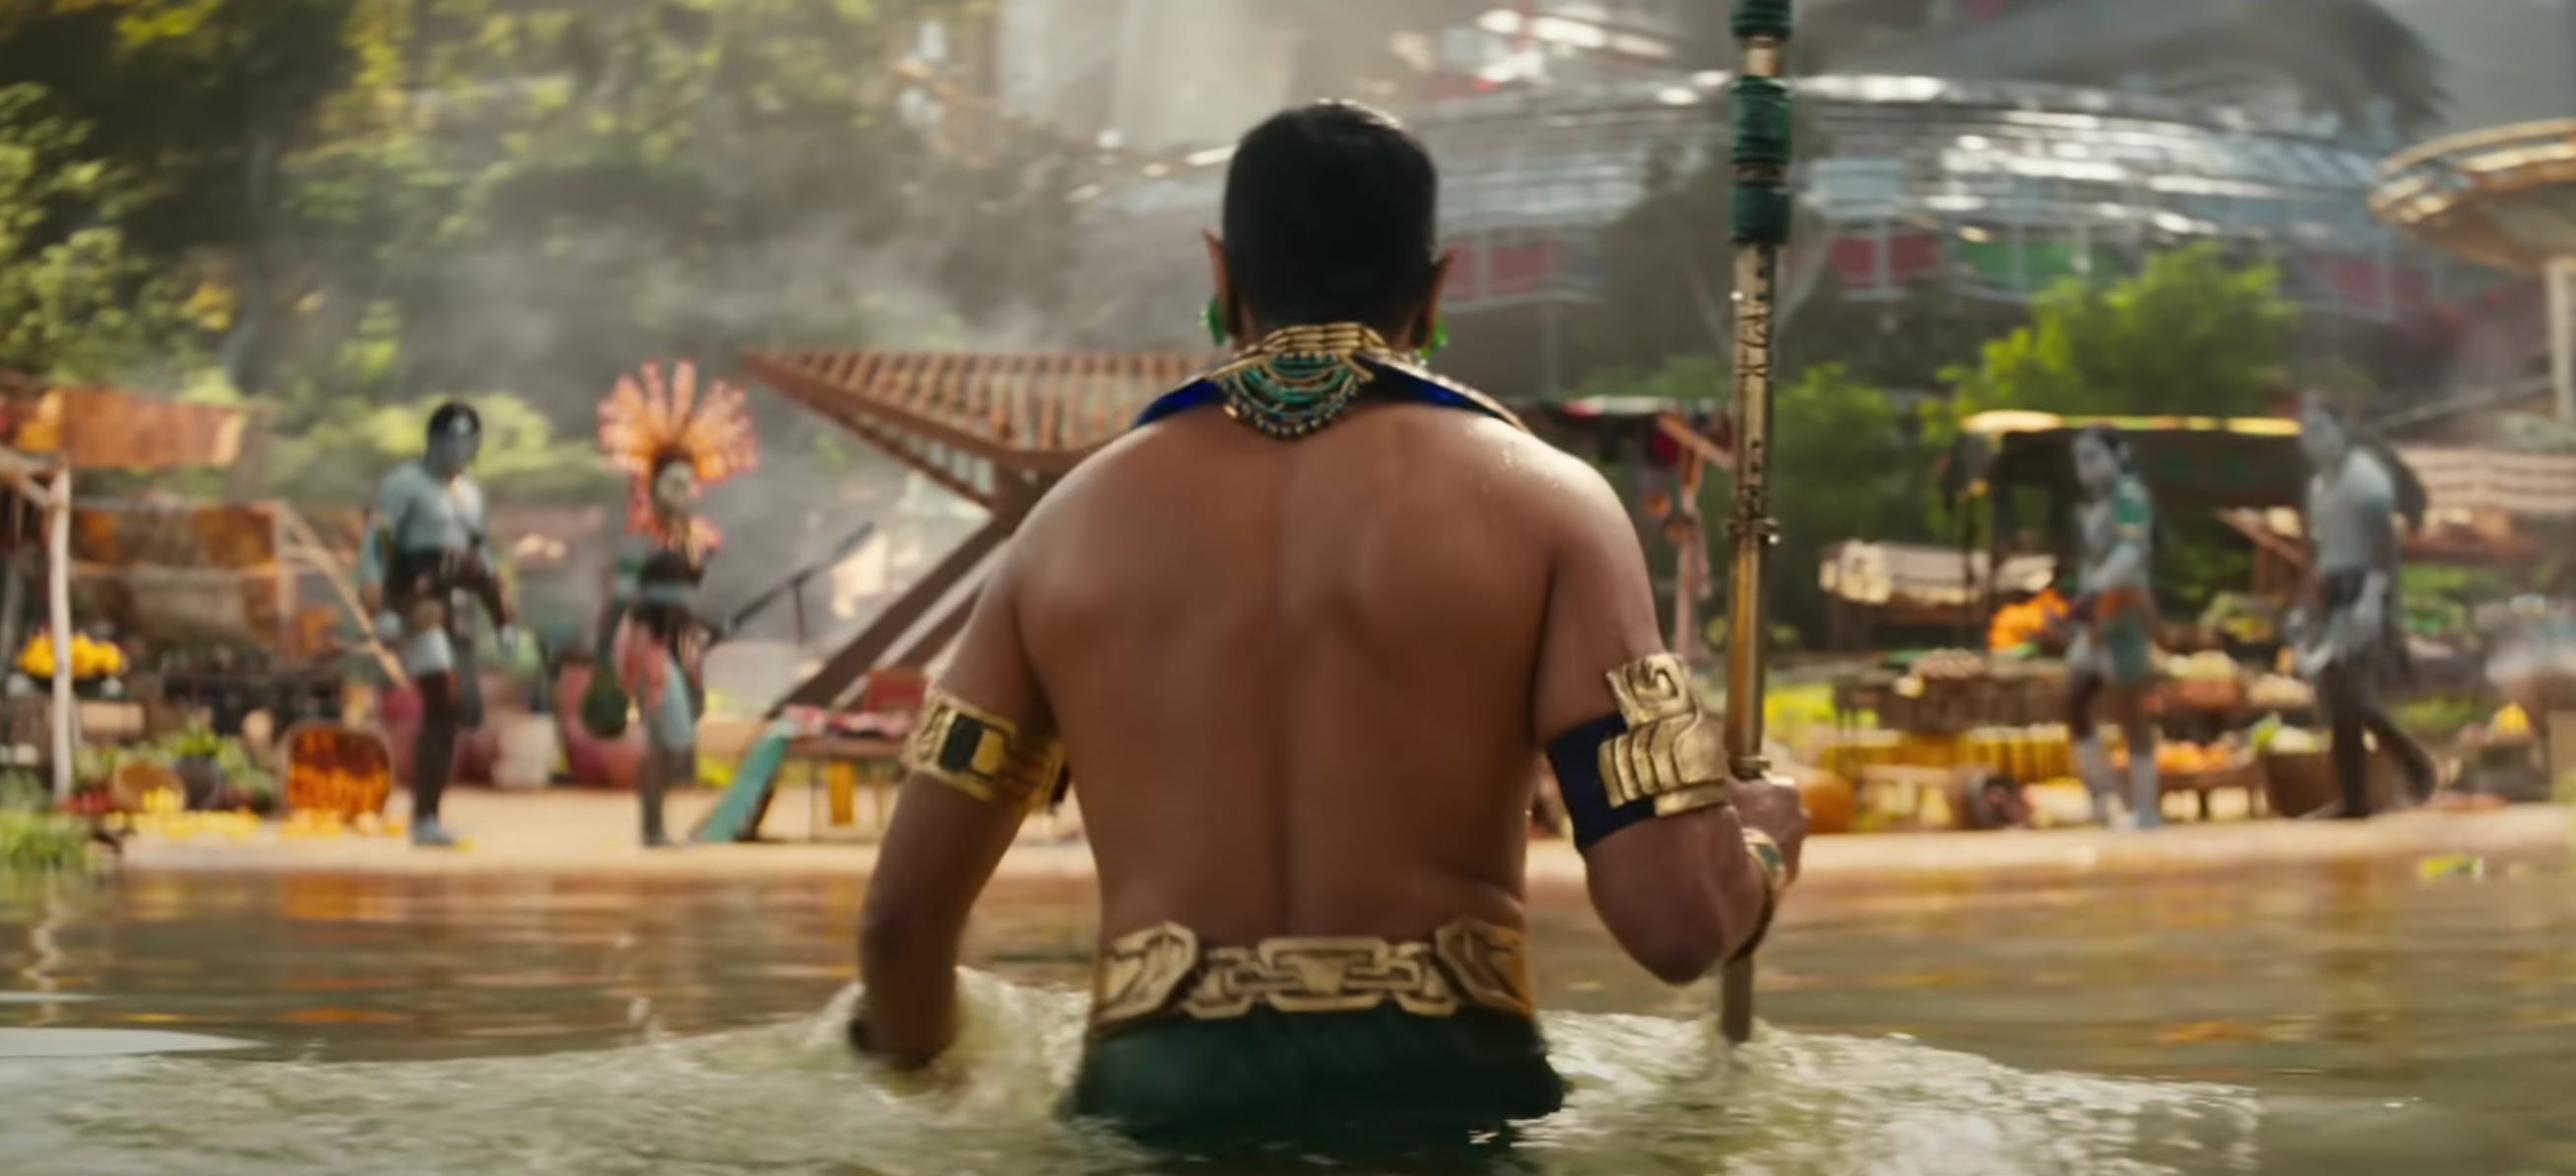 Black Panther Wakanda Forever Song In Trailer - Forrest Pearson News